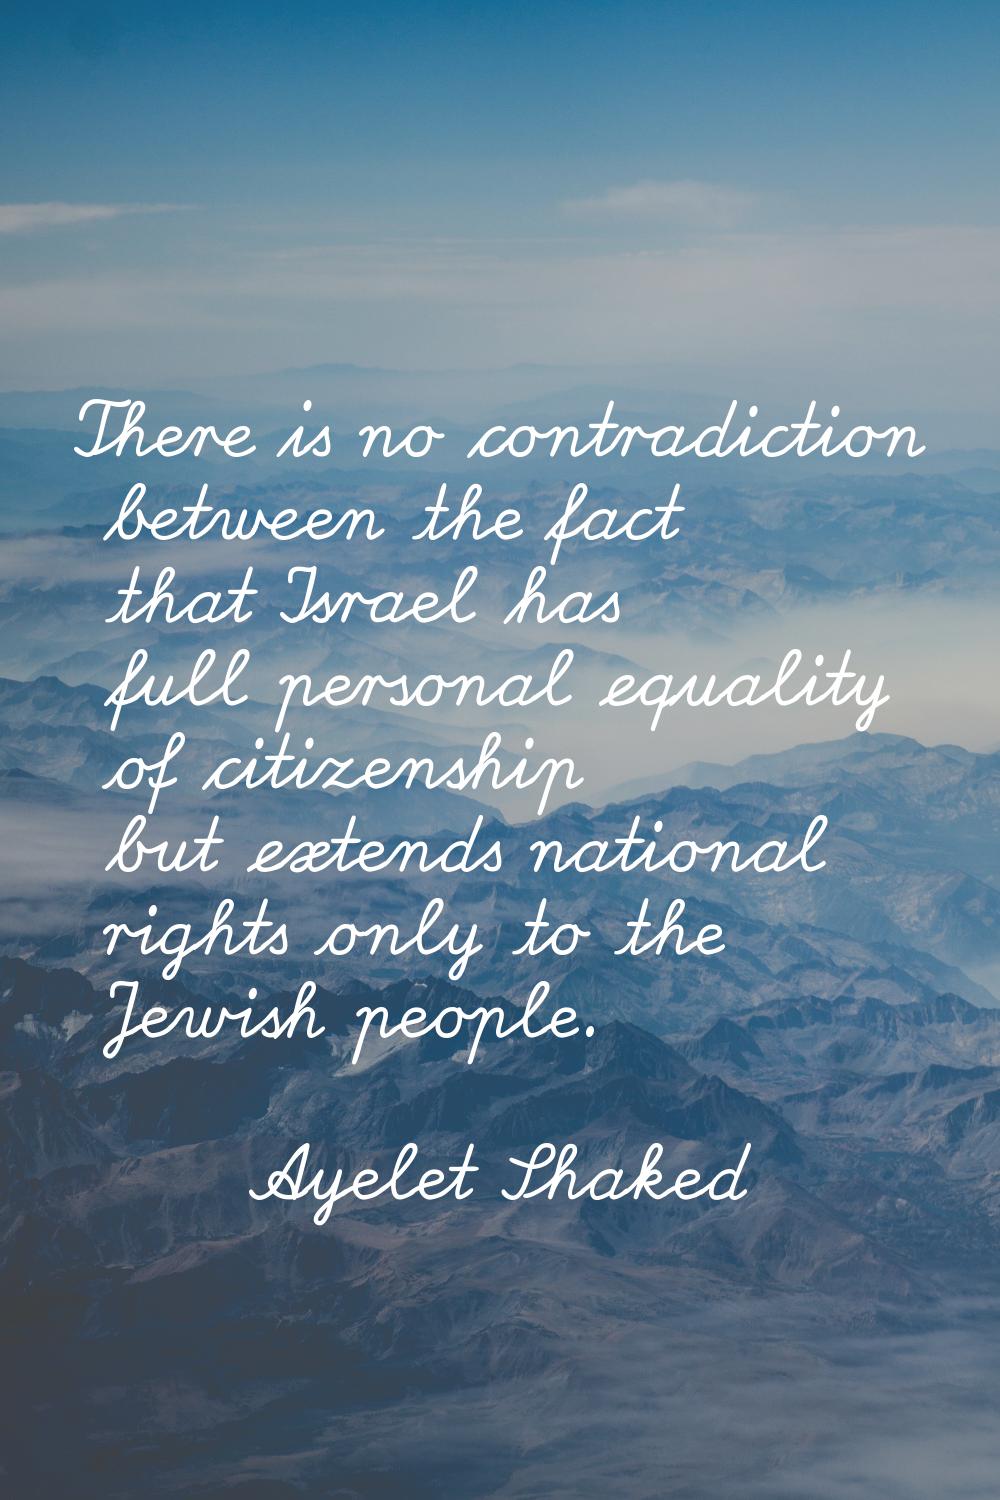 There is no contradiction between the fact that Israel has full personal equality of citizenship bu